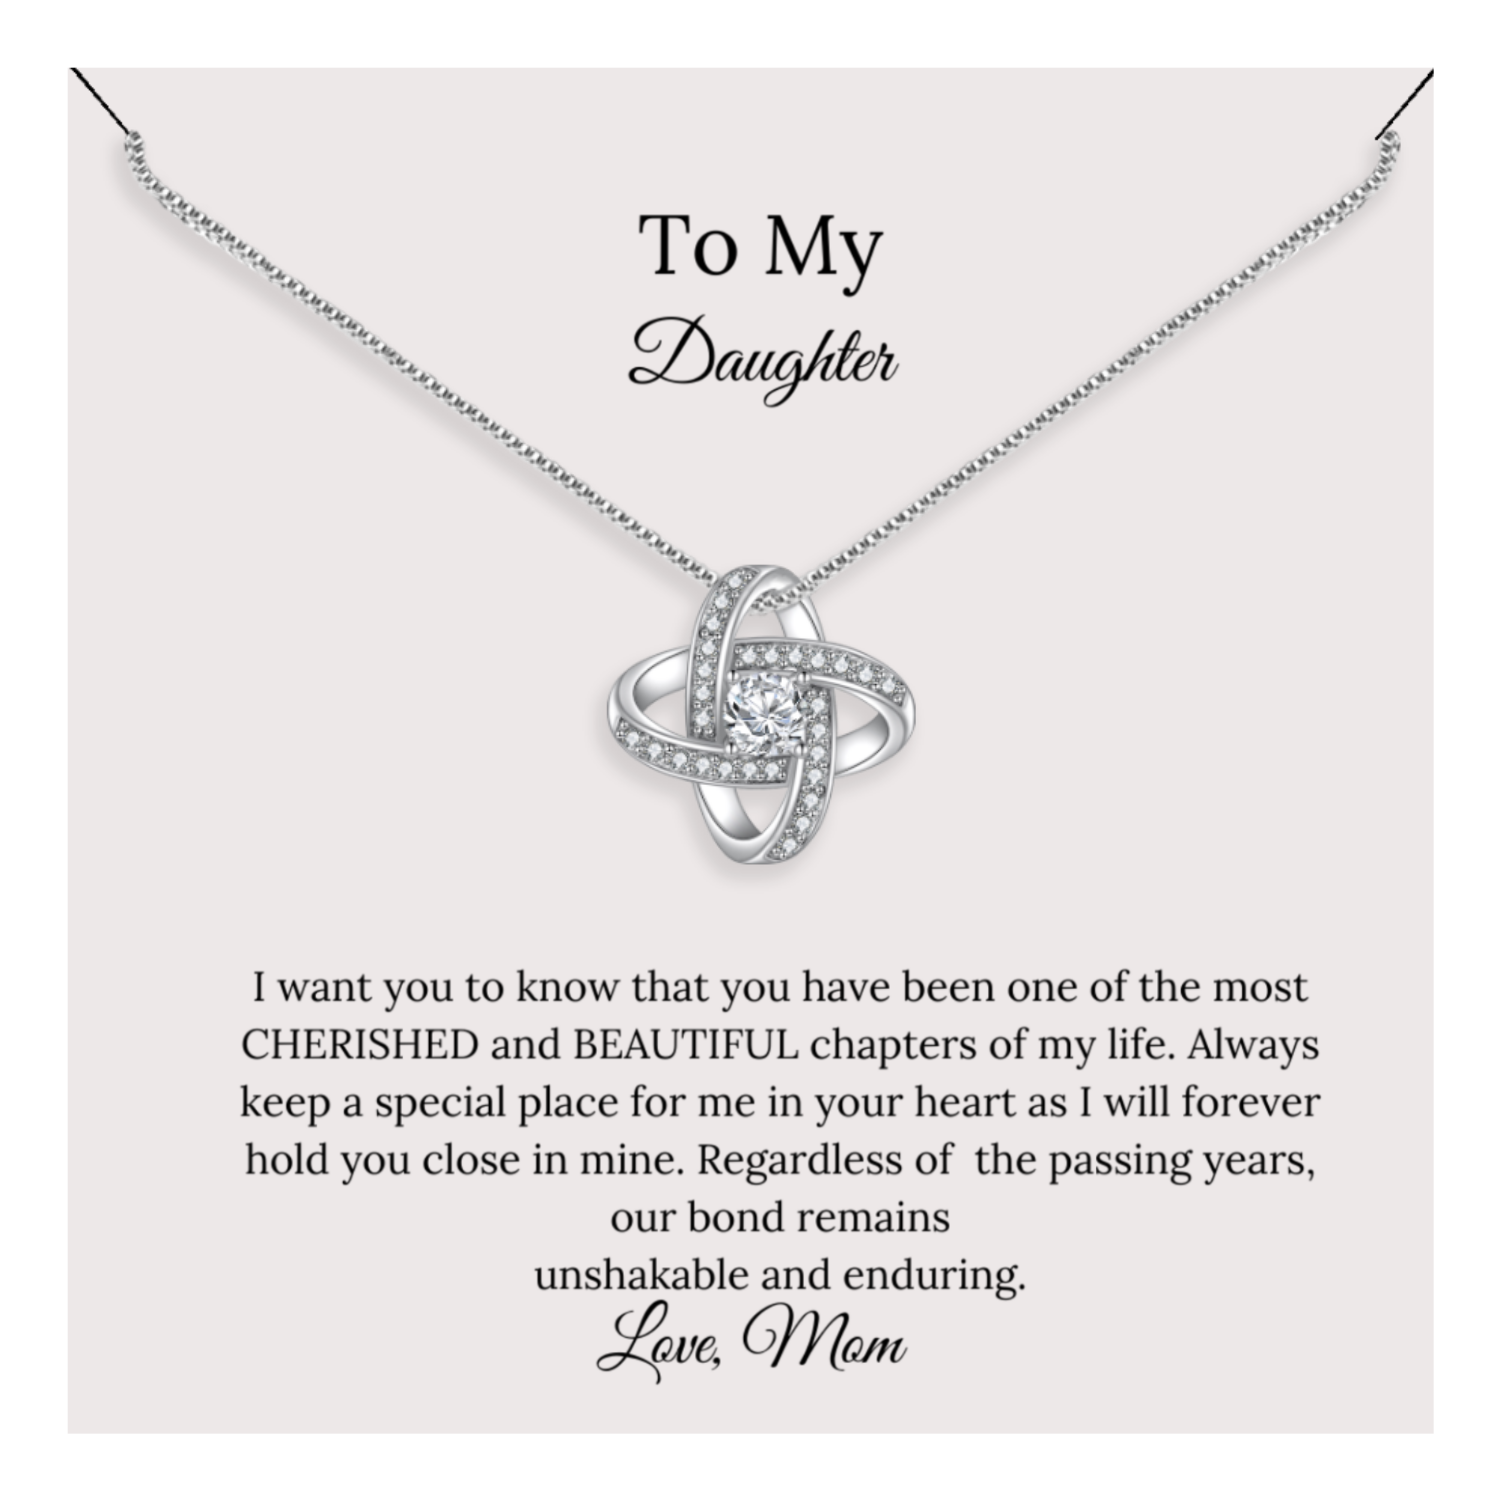 To My Daughter Necklace, Forever Love Necklace, Daughter Necklace, Daughter Gift From Mom - Mardonyx Jewelry Enduring Love Knot